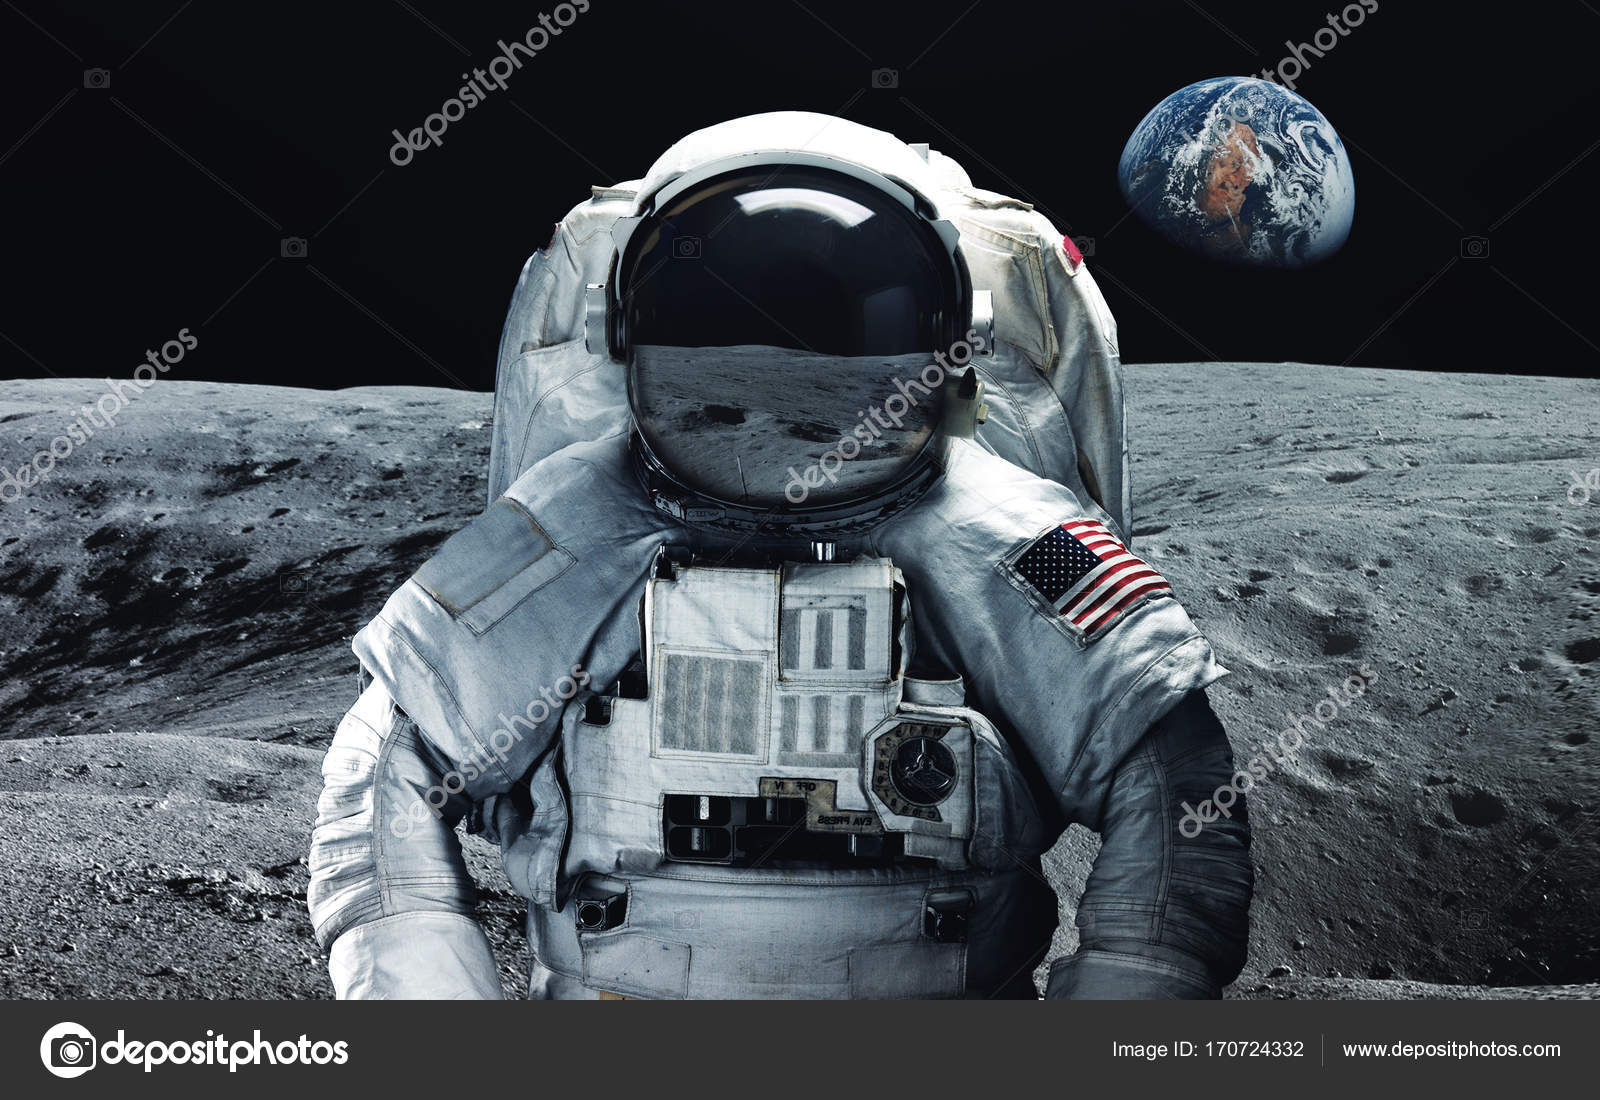 Astronaut At The Moon Abstract Space Wallpaper Universe Filled With Stars Nebulas Galaxies And Planets Elements Of This Image Furnished By Nasa Stock Editorial Photo C Shad Off